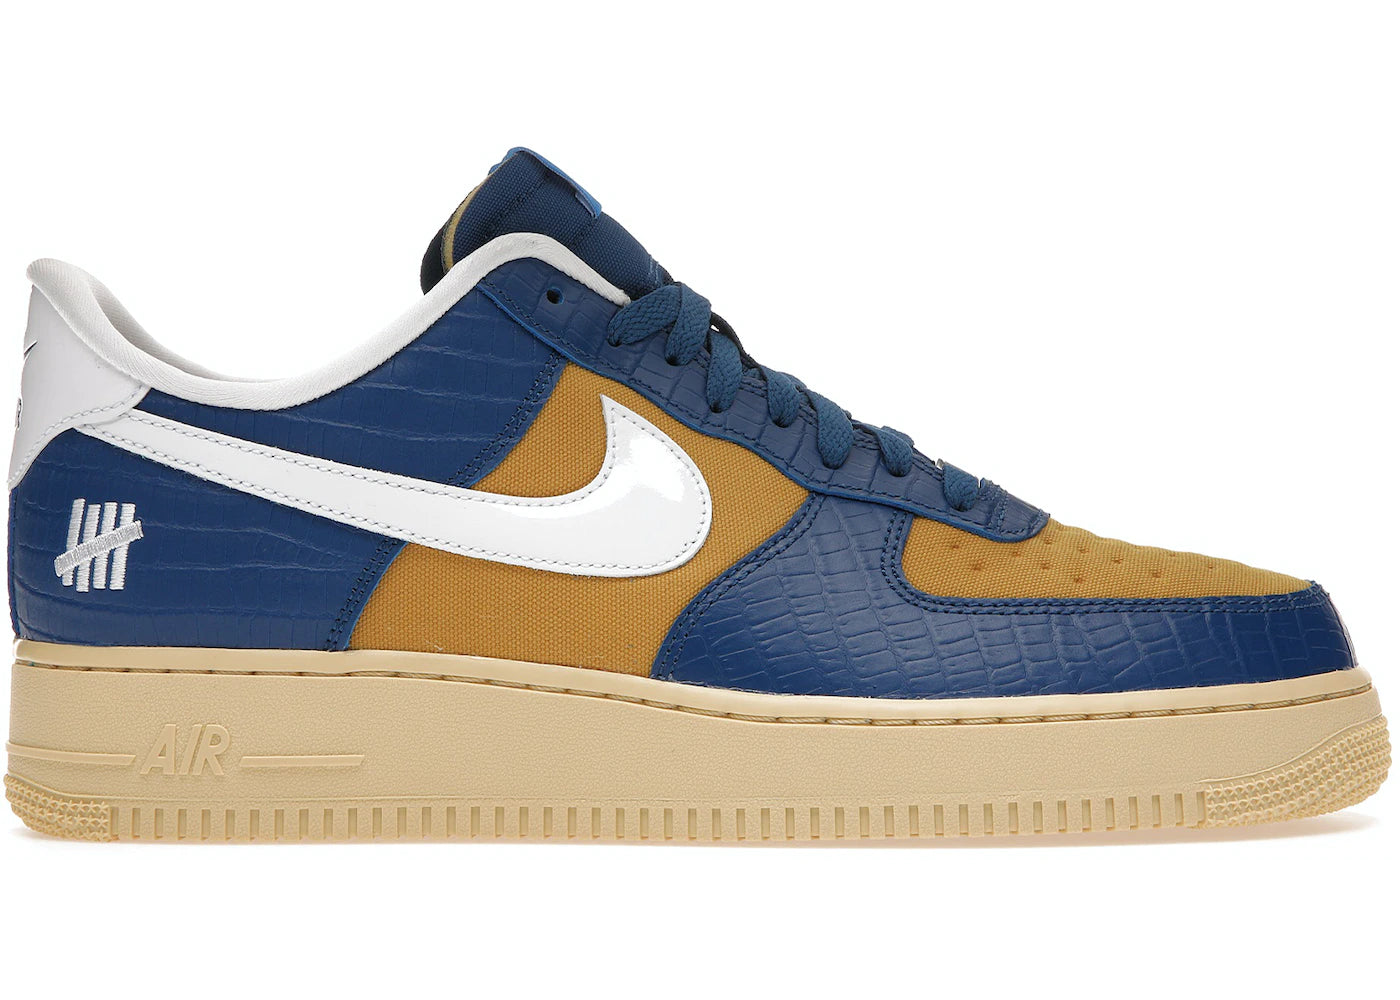 Nike Air Force 1 Low SP Undefeated 5 On It Blue Yellow Croc - Used